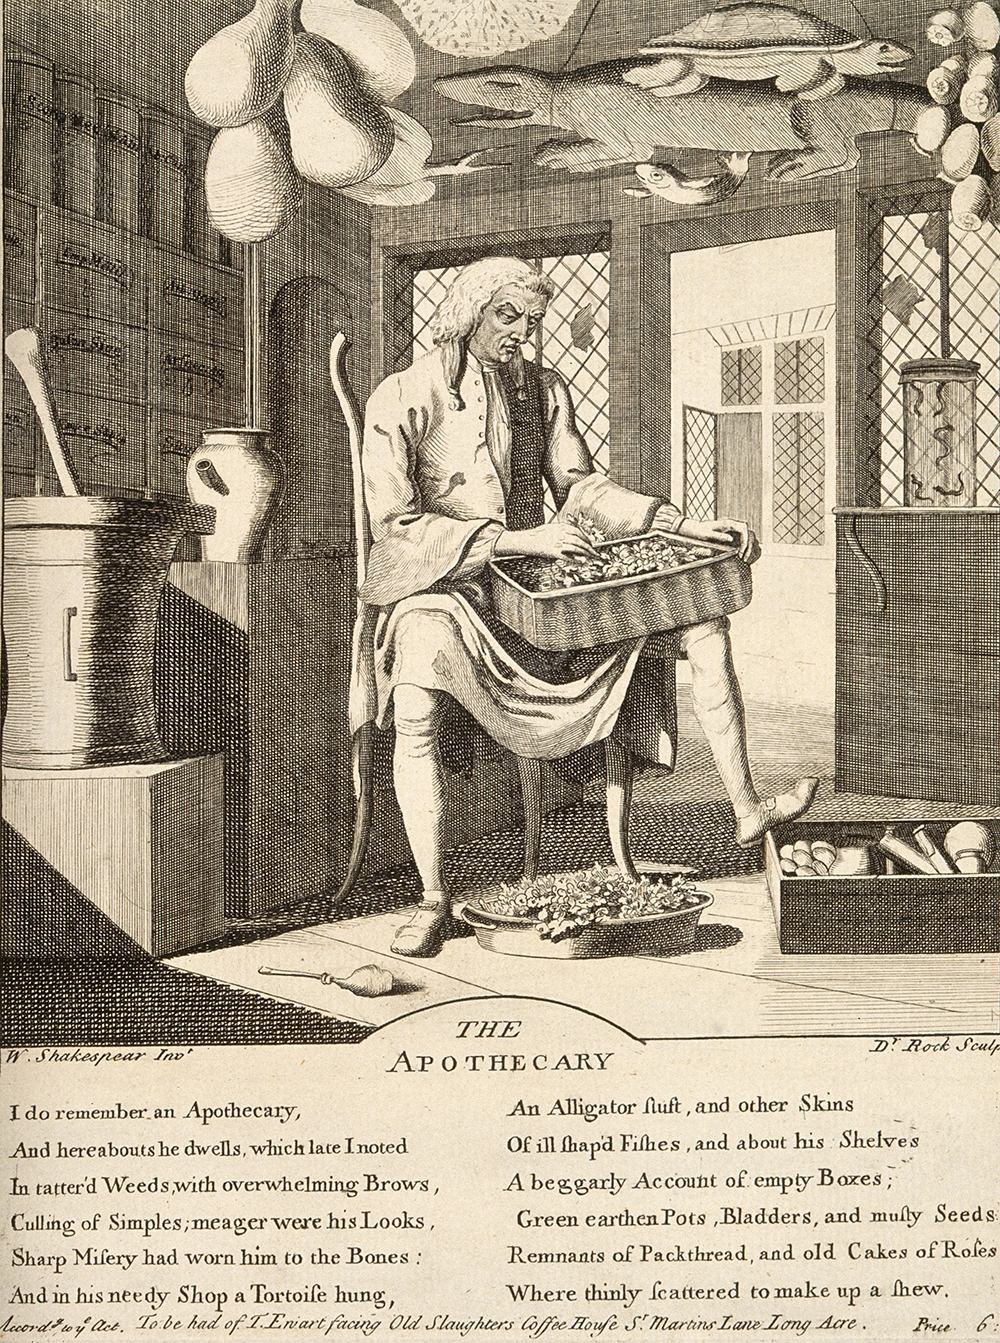 The apothecary from William Shakespeare's Romeo and Juliet 